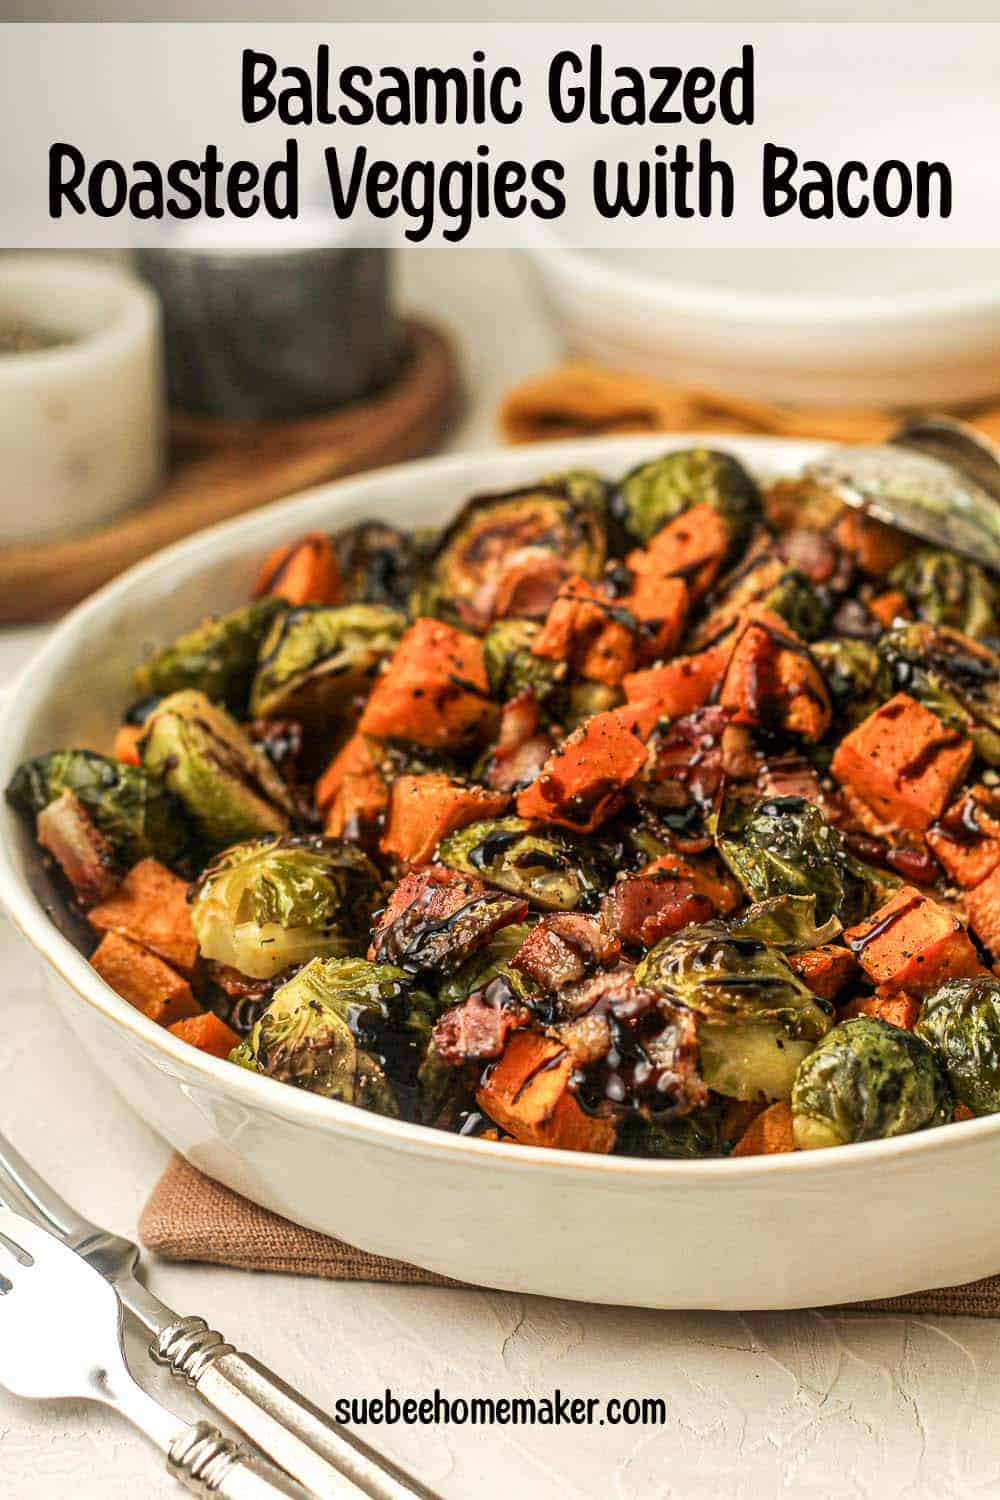 Side view of a large serving bowl of balsamic glazed roasted veggies with bacon.